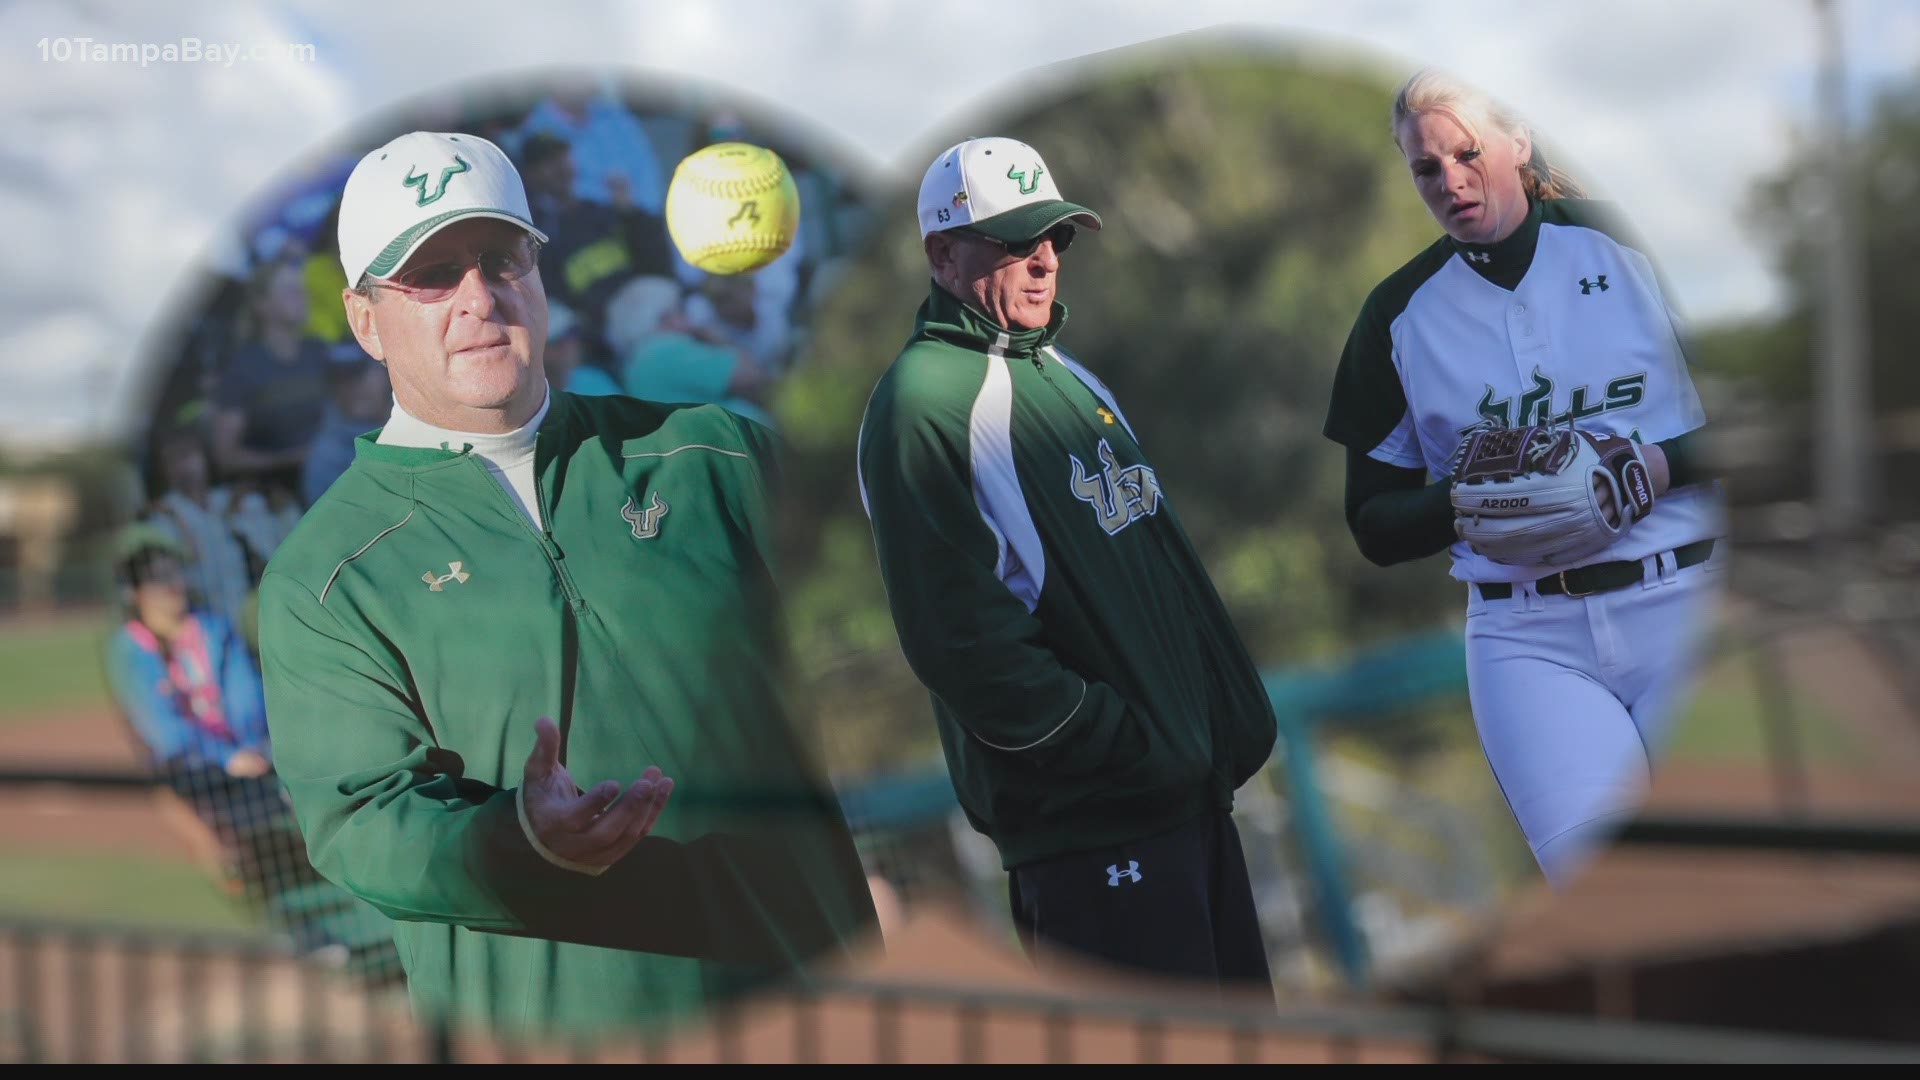 Ken Eriksen took over as the head coach of the USF softball program in 1997. He hit the 1,000-win milestone April 30 but is more focused on teaching than winning.